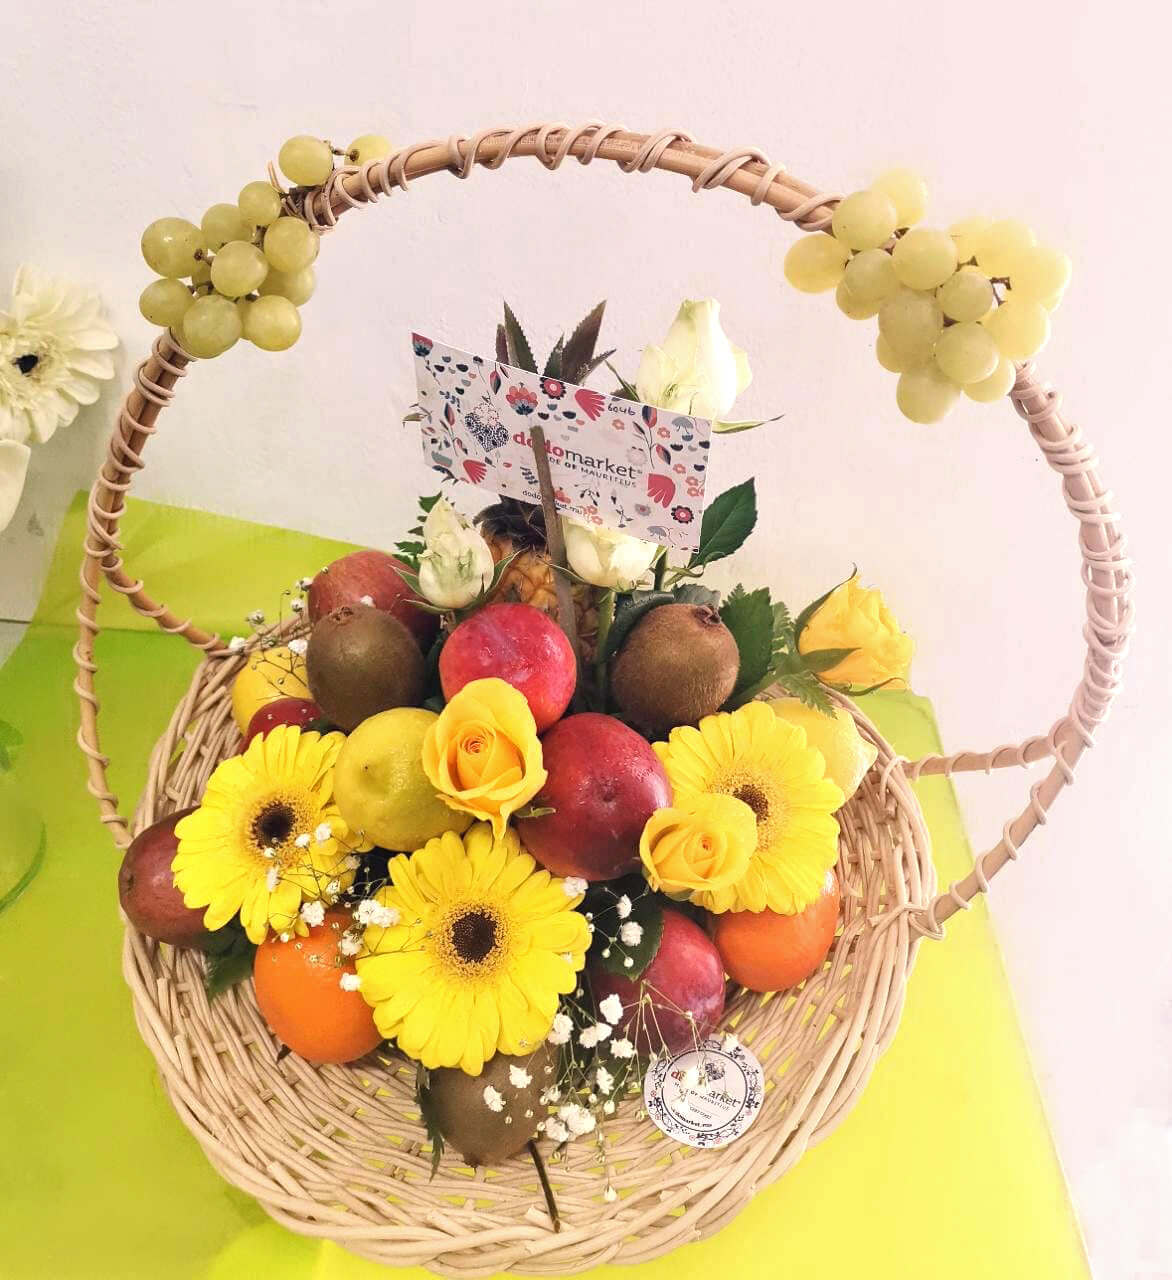 Charming-Fruits-n-Flowers-Basket-Gift-Dodomarket-delivery-Mauritius